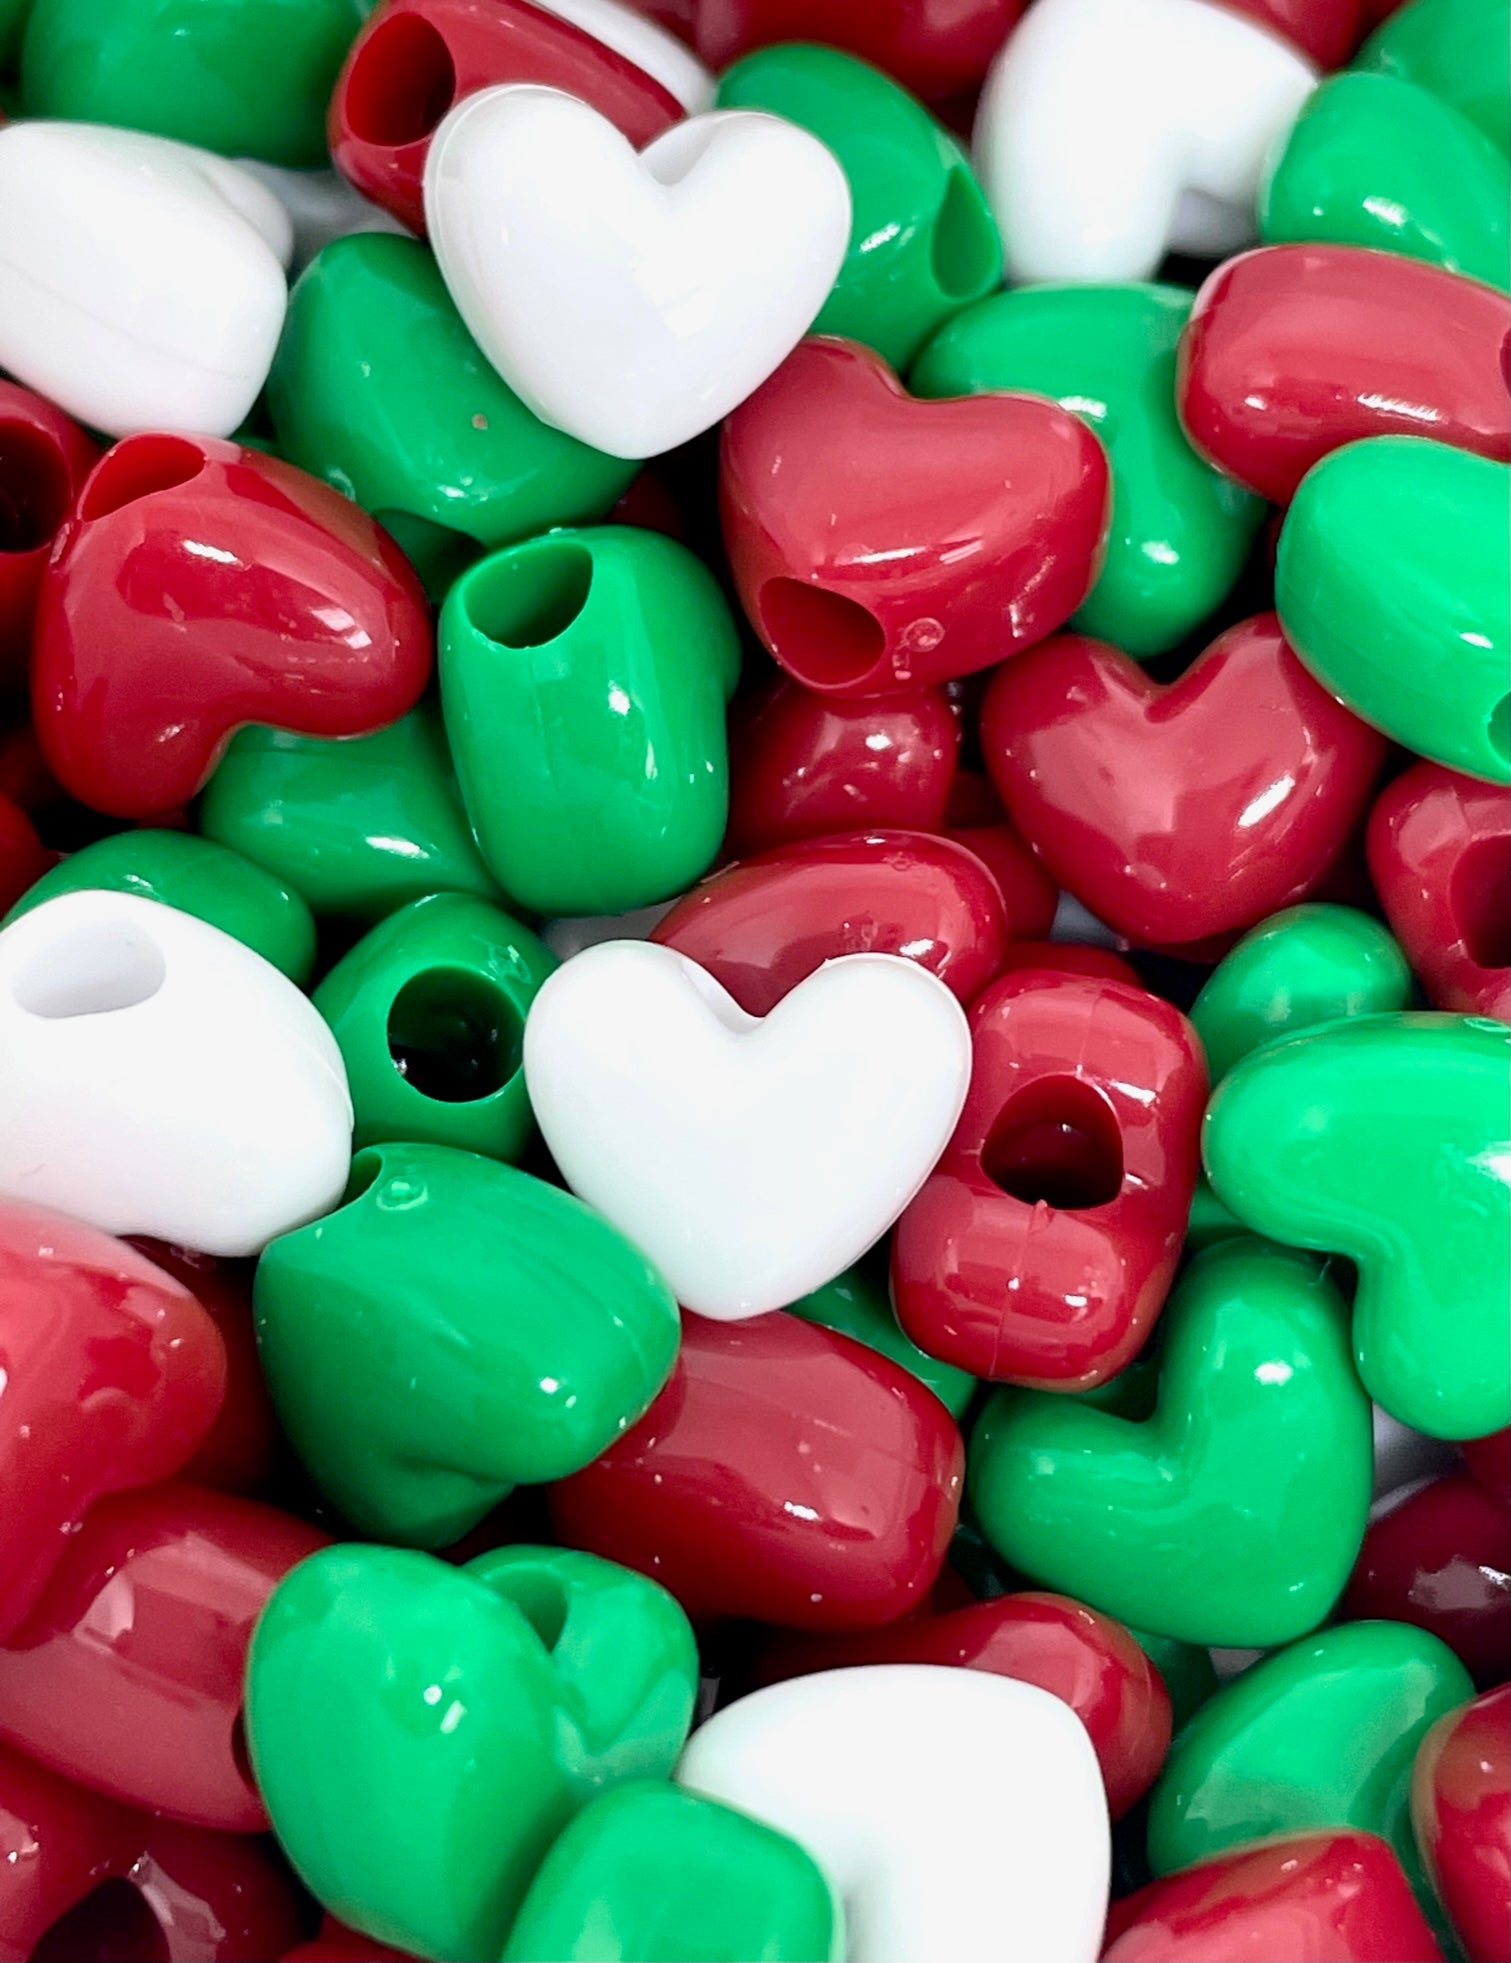 Celebrate Cinco de Mayo with Vibrant, Festive Beads from Madison Beads